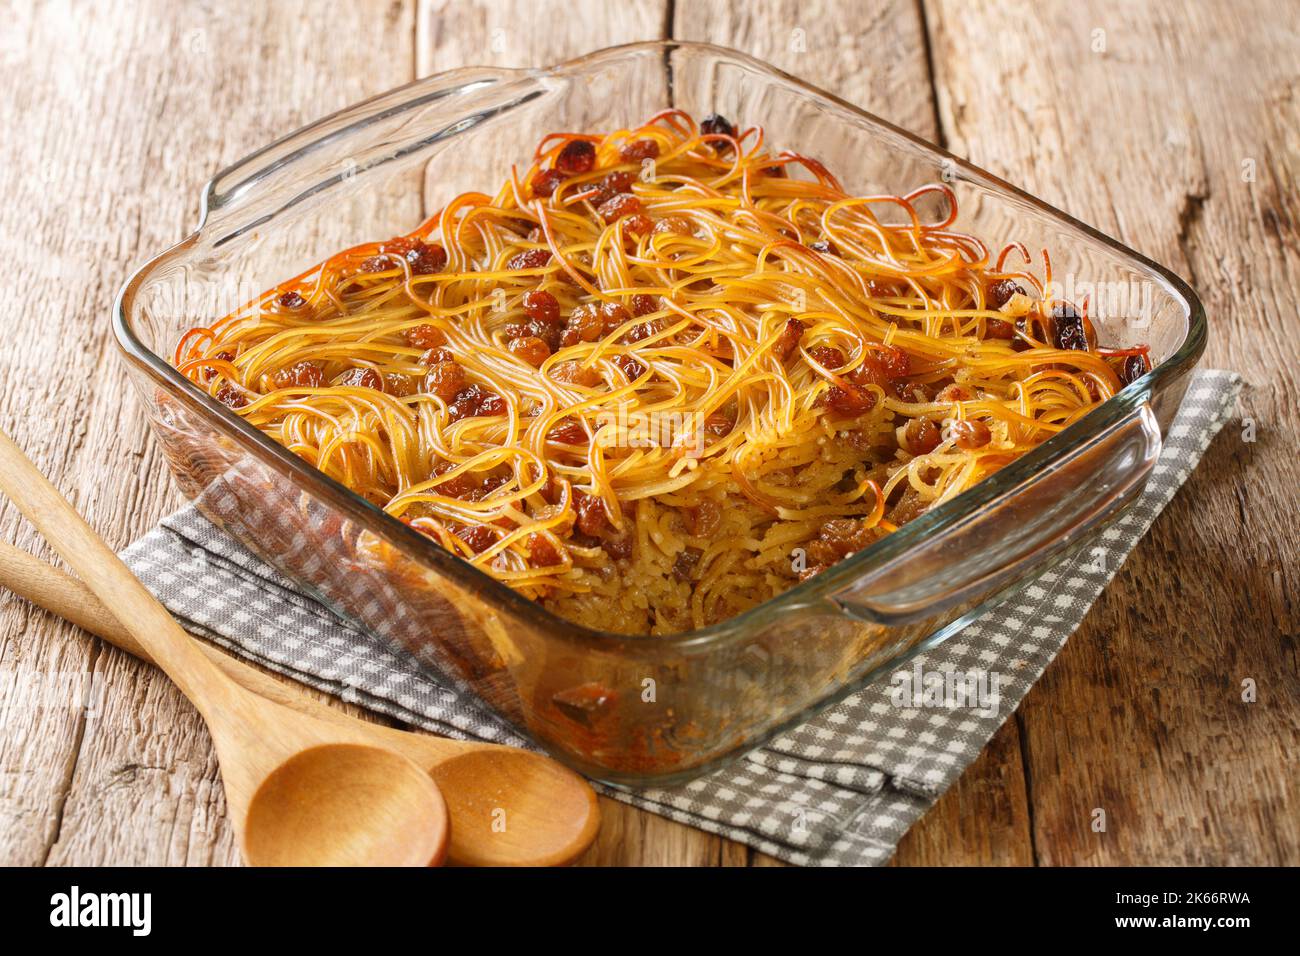 Jerusalem noodle kugel a Jewish pie for Shabbat Kodesh close-up in a glass bowl on the table. Horizontal Stock Photo